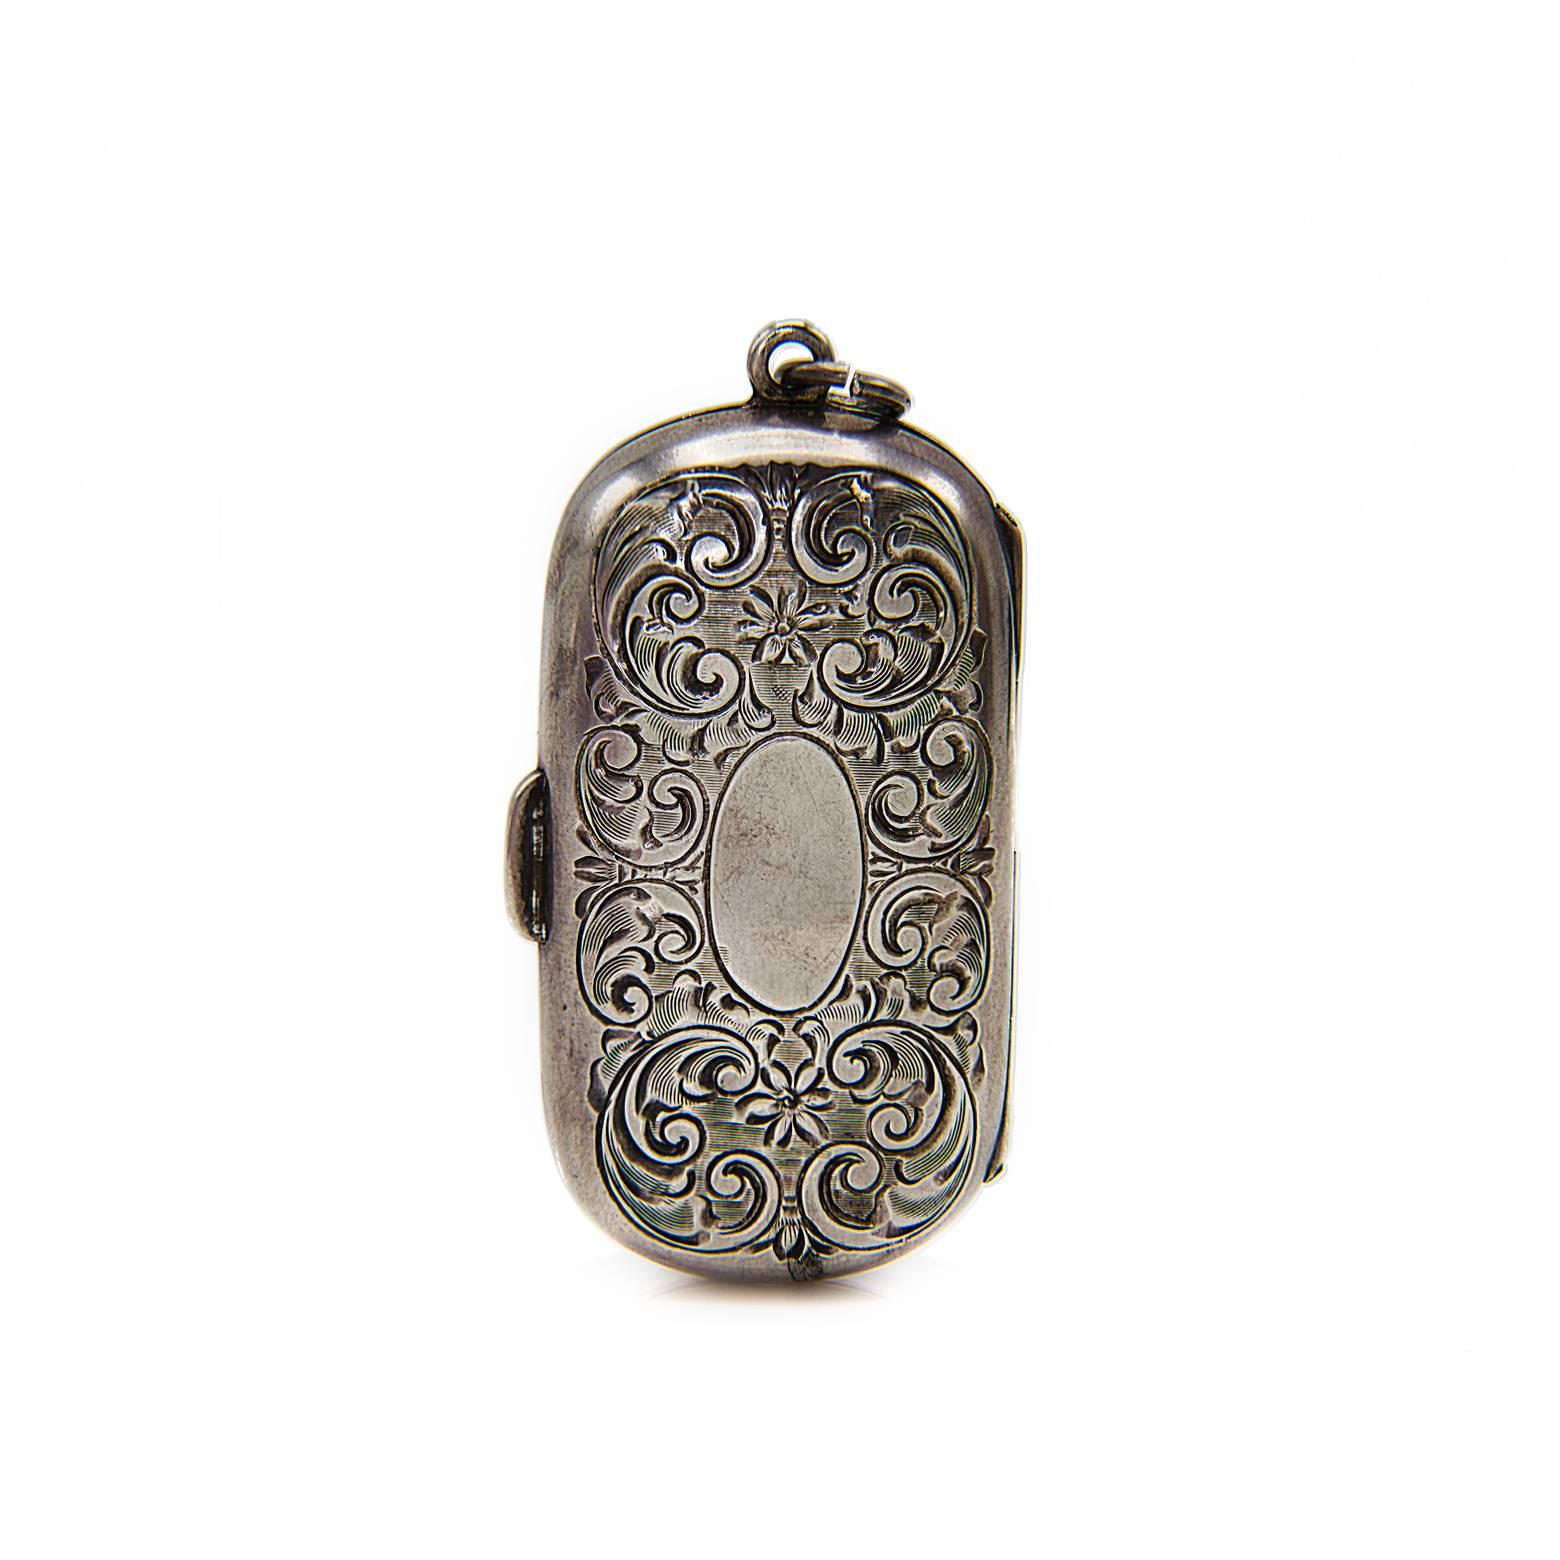 This decorated spring-loaded coin-holder is engraved with spirals and swirls in an almost paisley fashion. Perfect on a chain worn as a locket, or on a chain in your pocket- it's absolutely charming! This piece of history is sure to inspire your